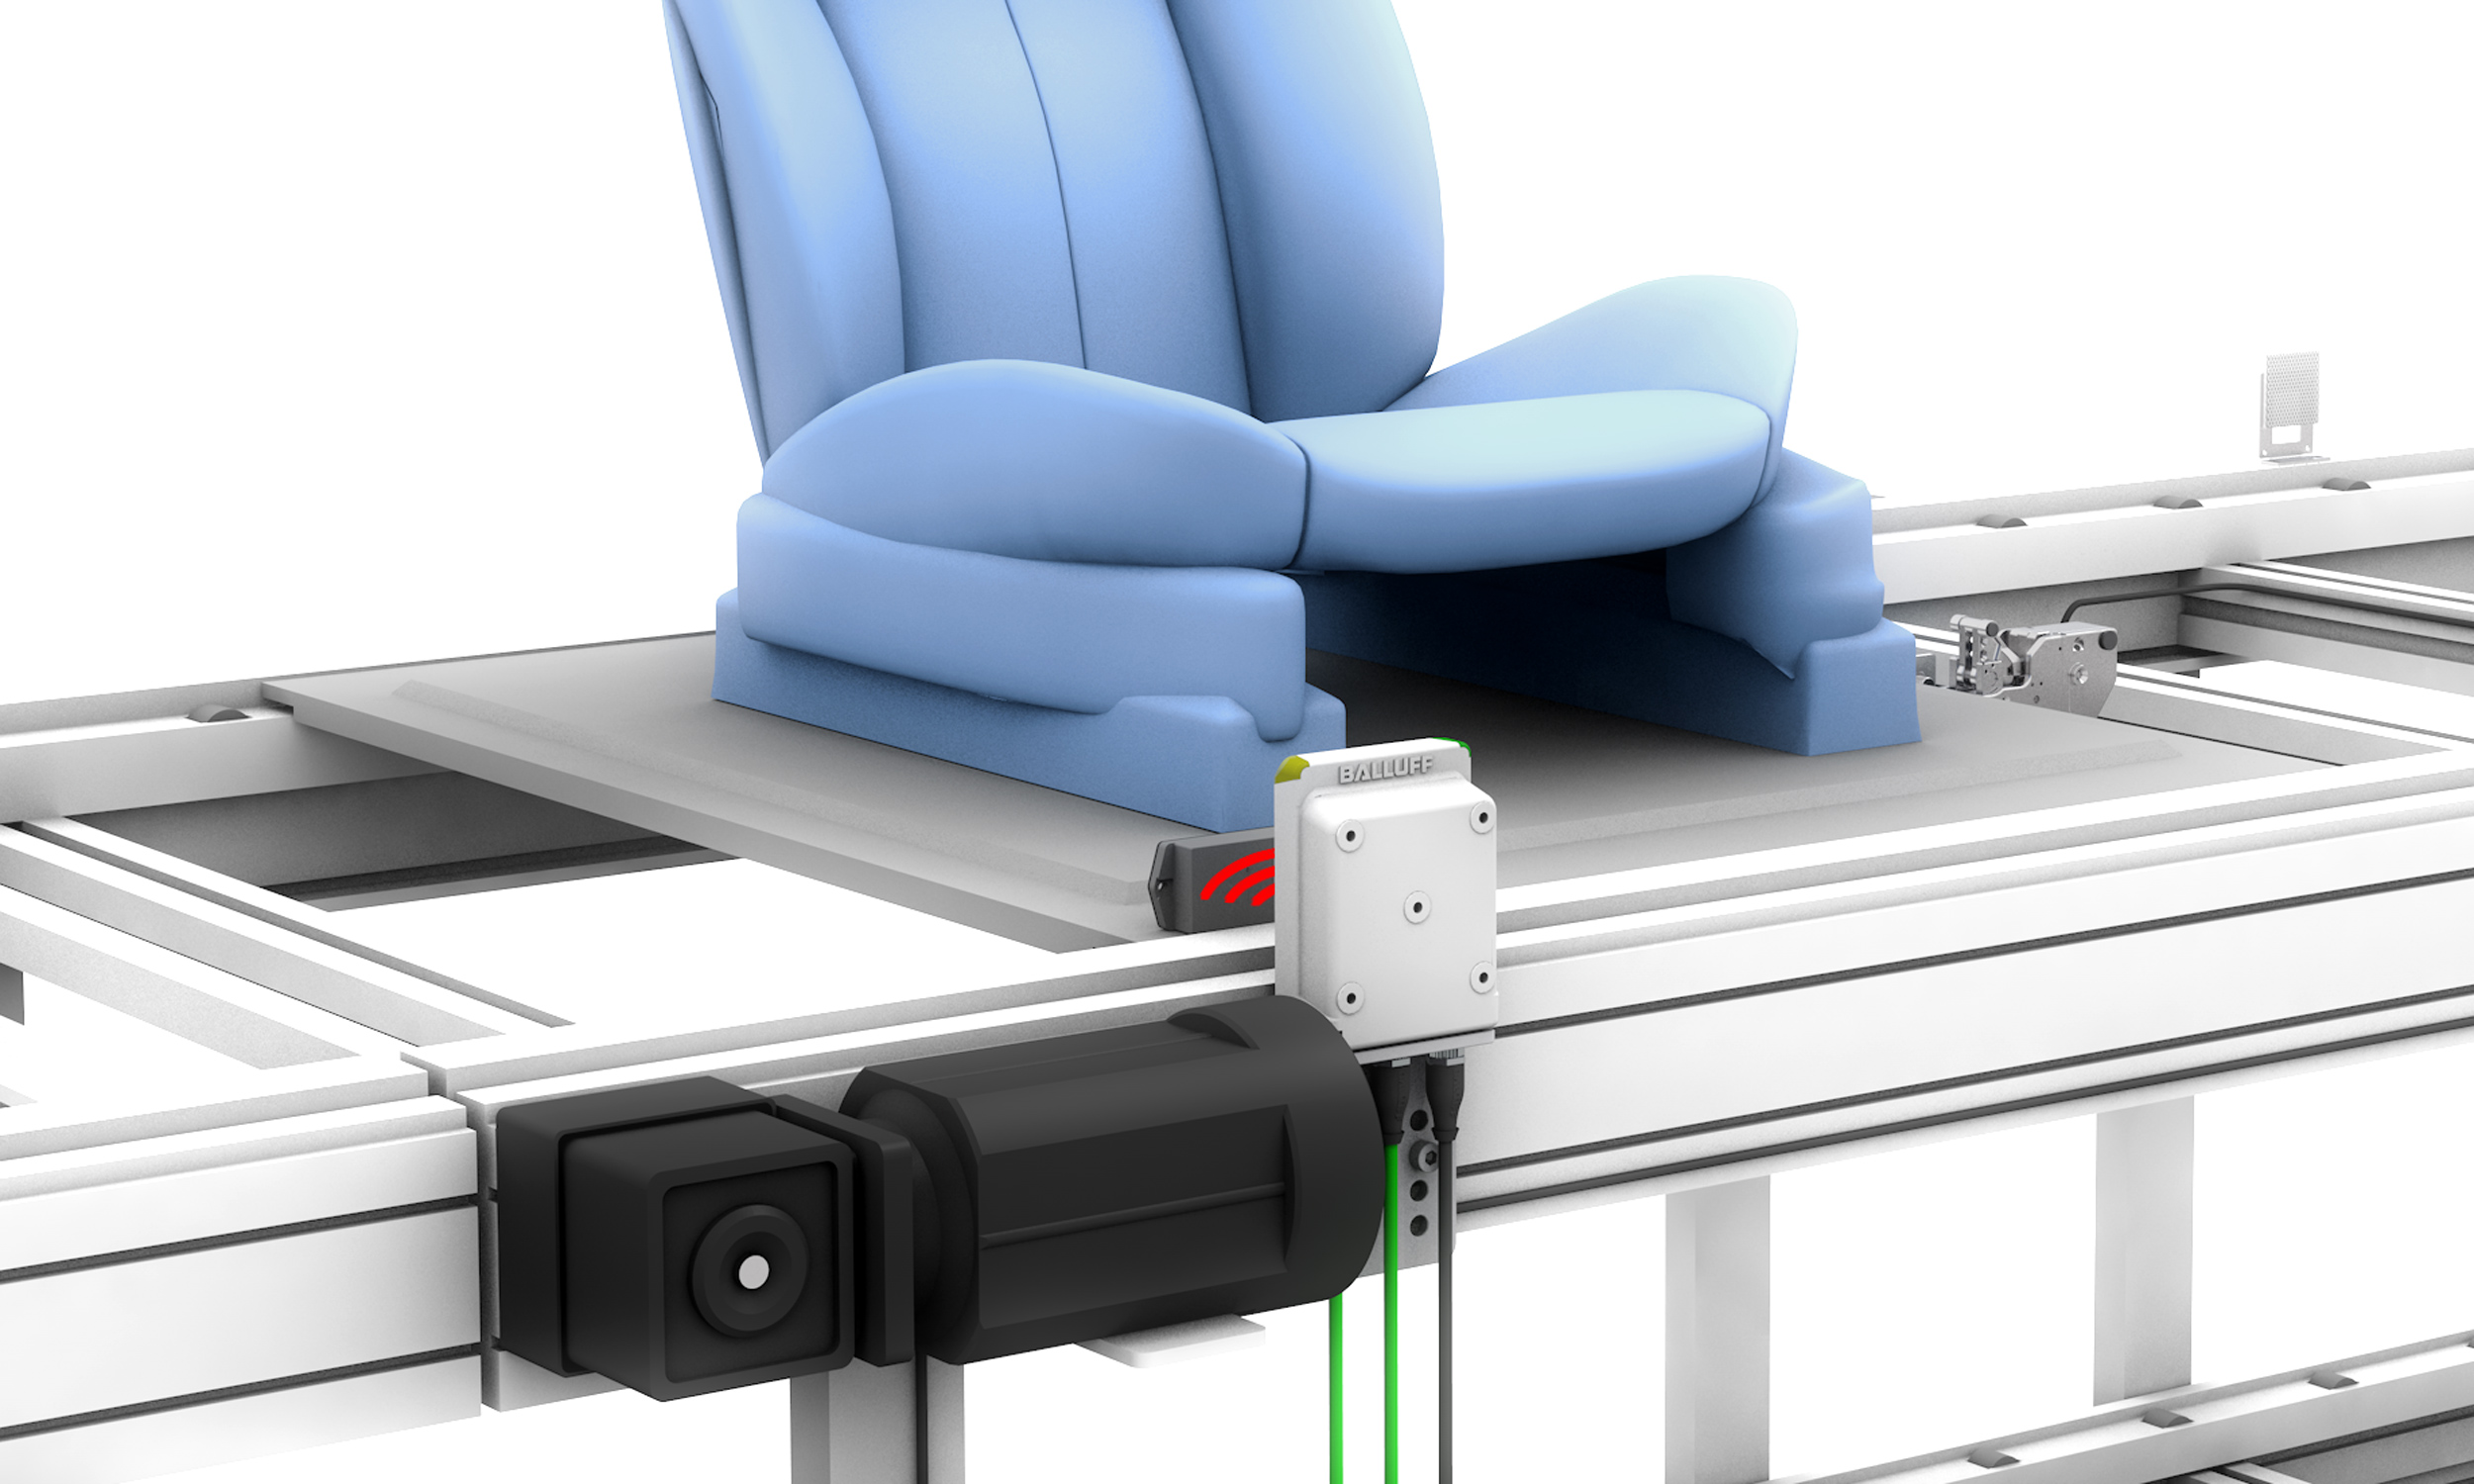 Enable traceability in seat assembly image